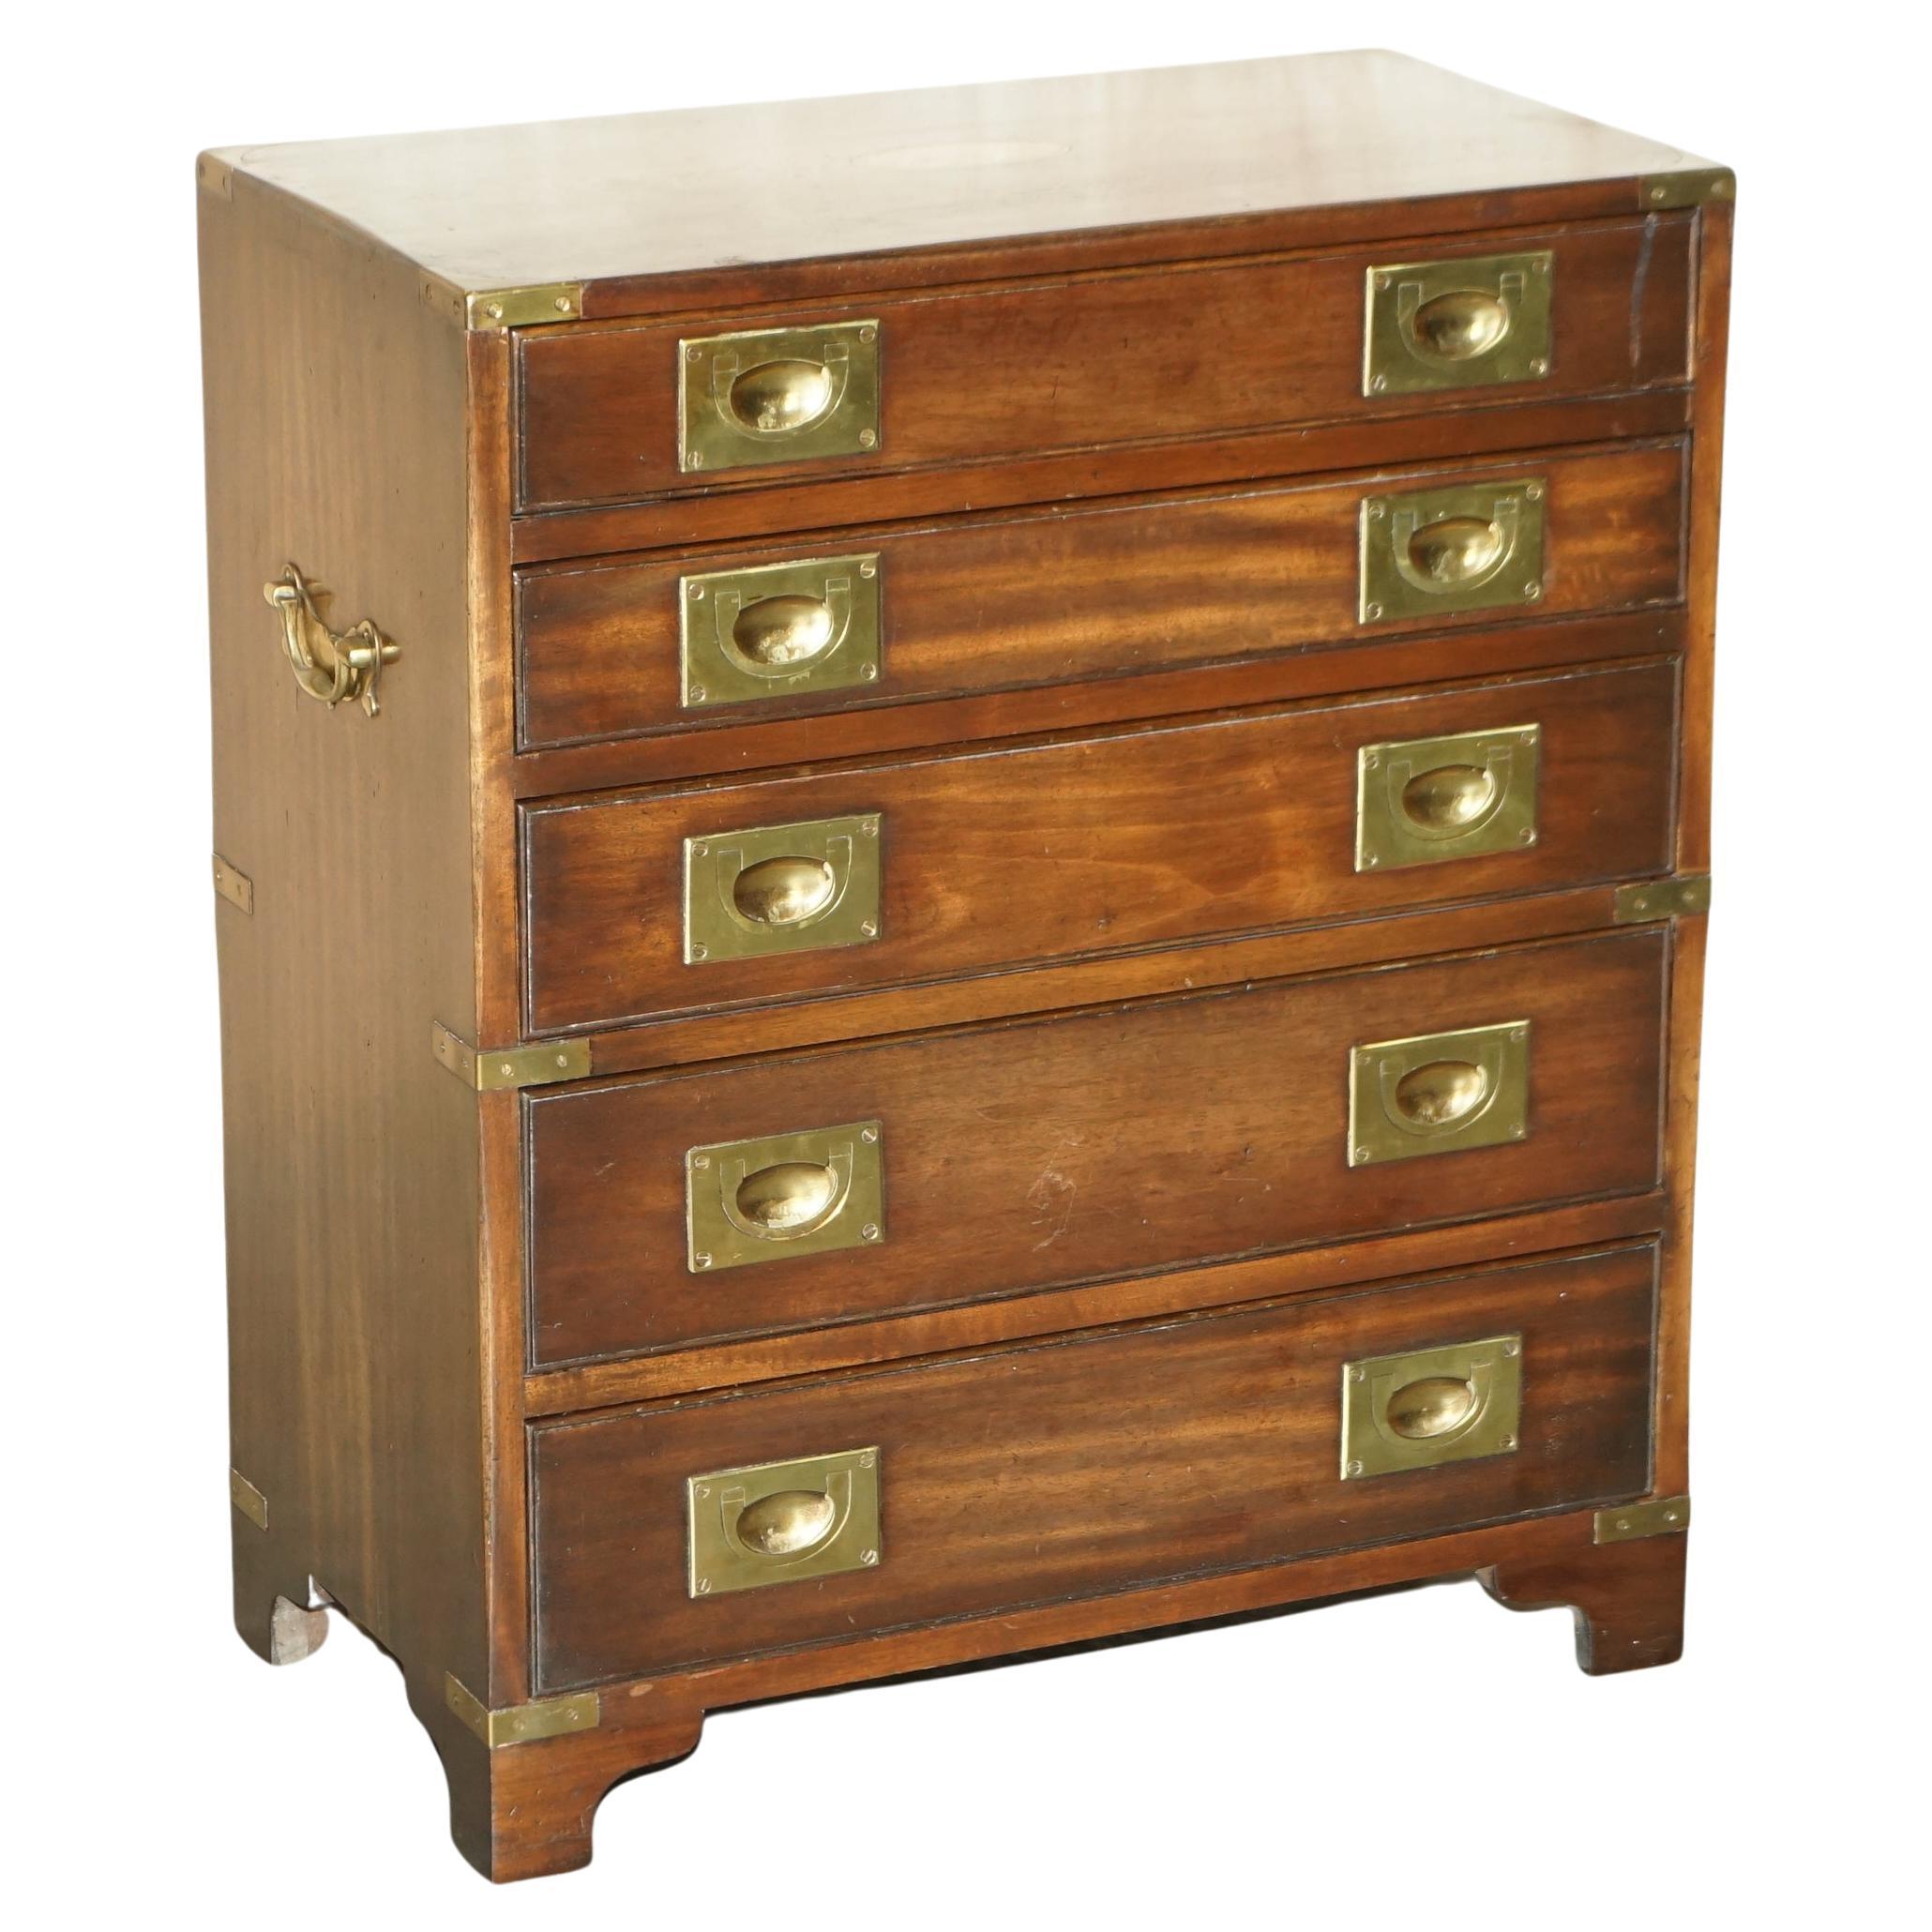 Harrods PAIR OF HARRODS KENNEDY MILITARY CAMPAIGN CHEST OF DRAWERS SIDE END LAMP TABLES 